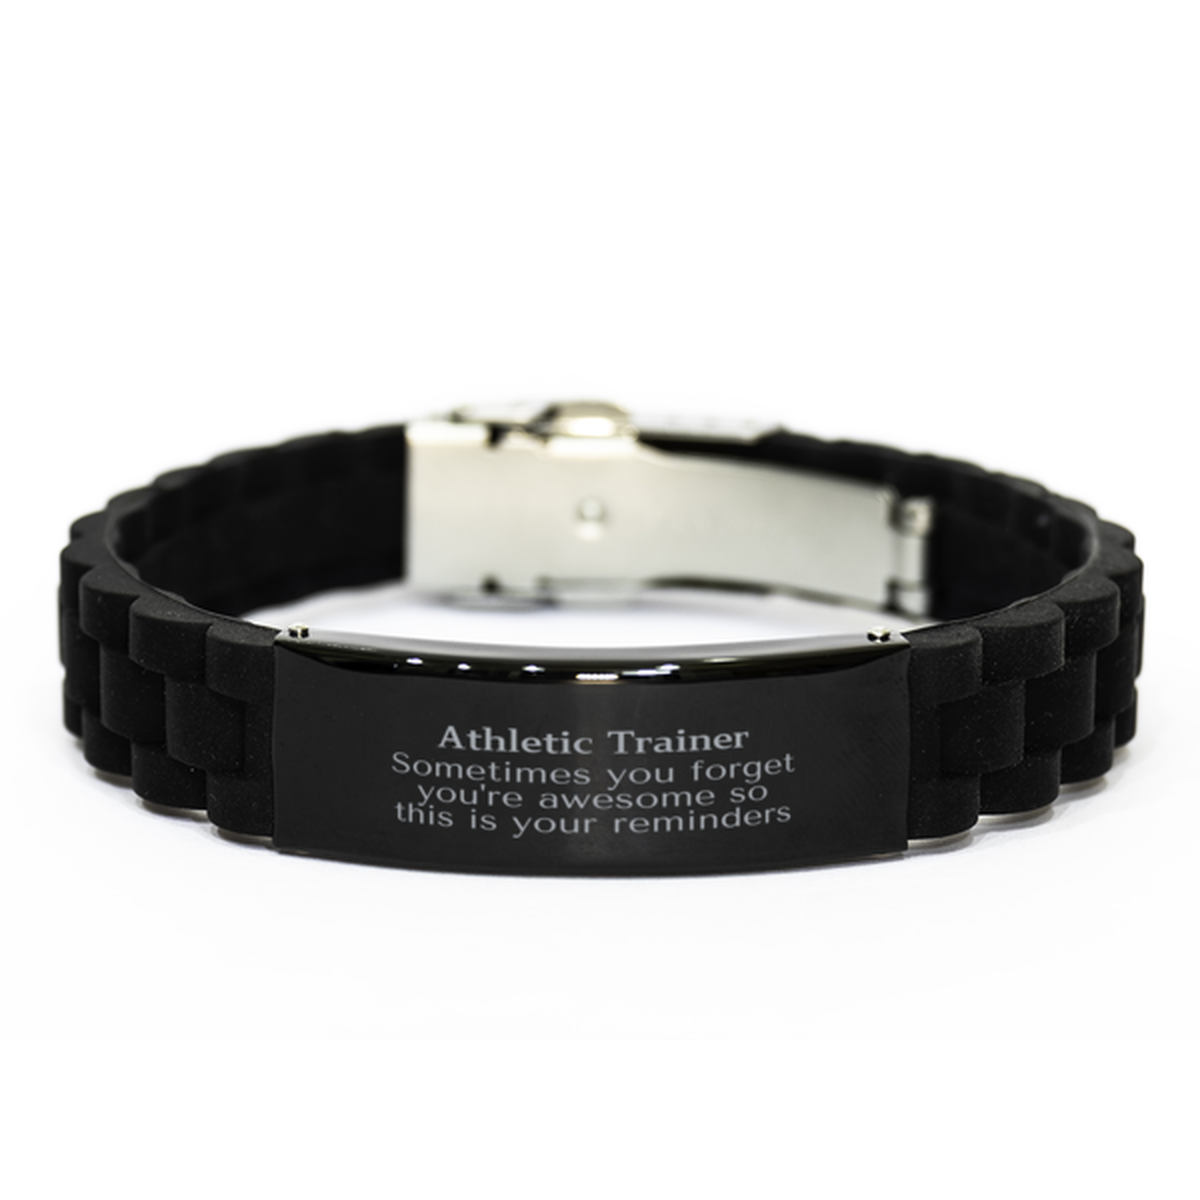 Sentimental Athletic Trainer Black Glidelock Clasp Bracelet, Athletic Trainer Sometimes you forget you're awesome so this is your reminders, Graduation Christmas Birthday Gifts for Athletic Trainer, Men, Women, Coworkers